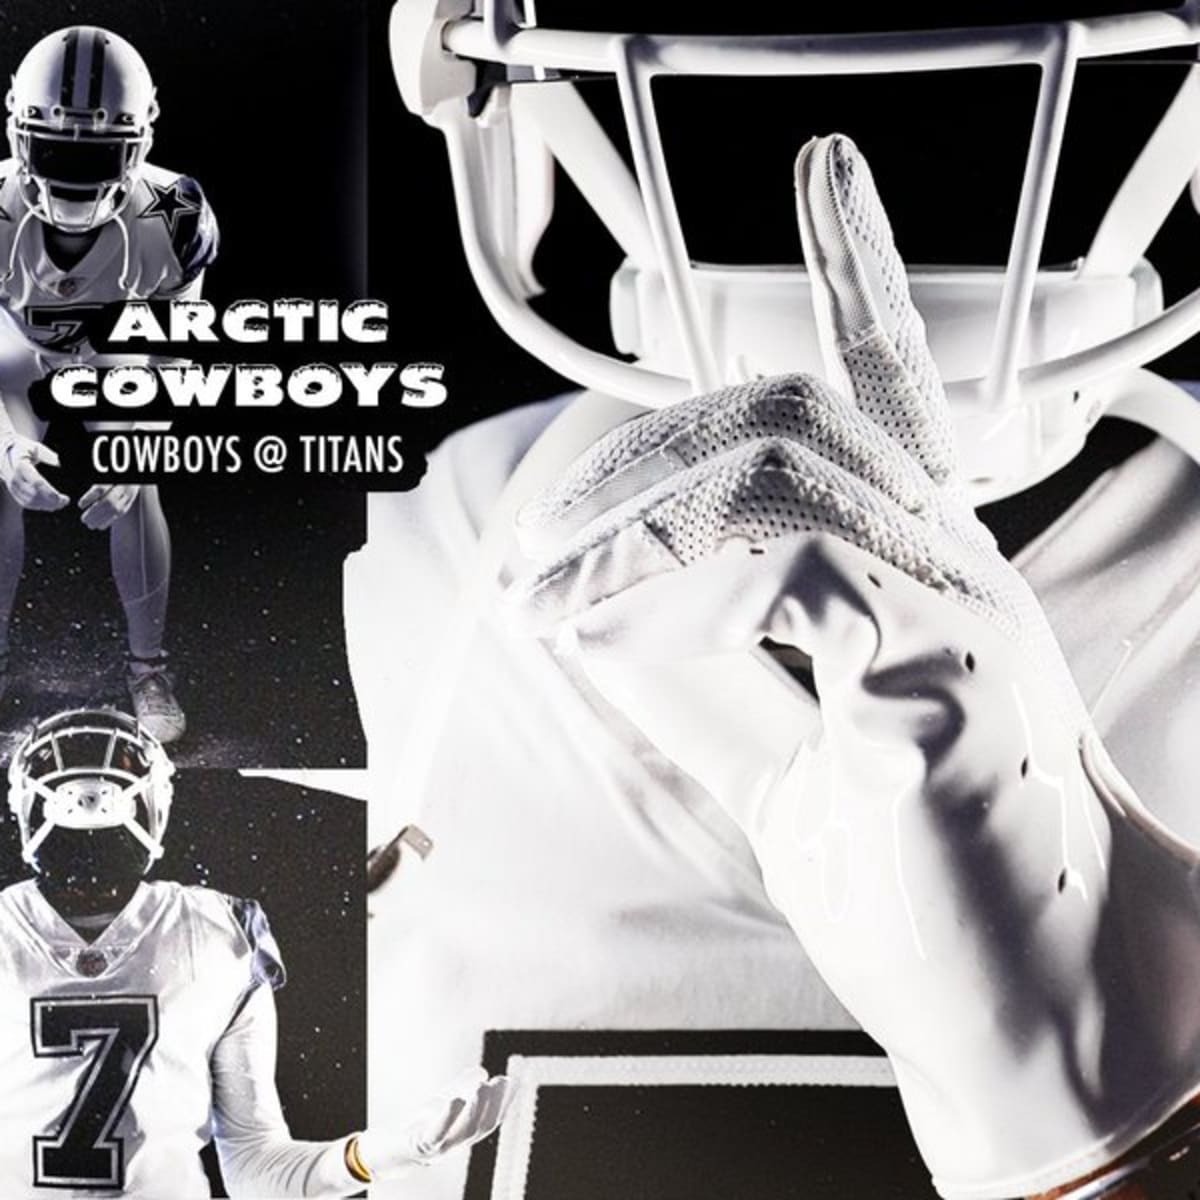 First look: 'New' Cowboys uniforms